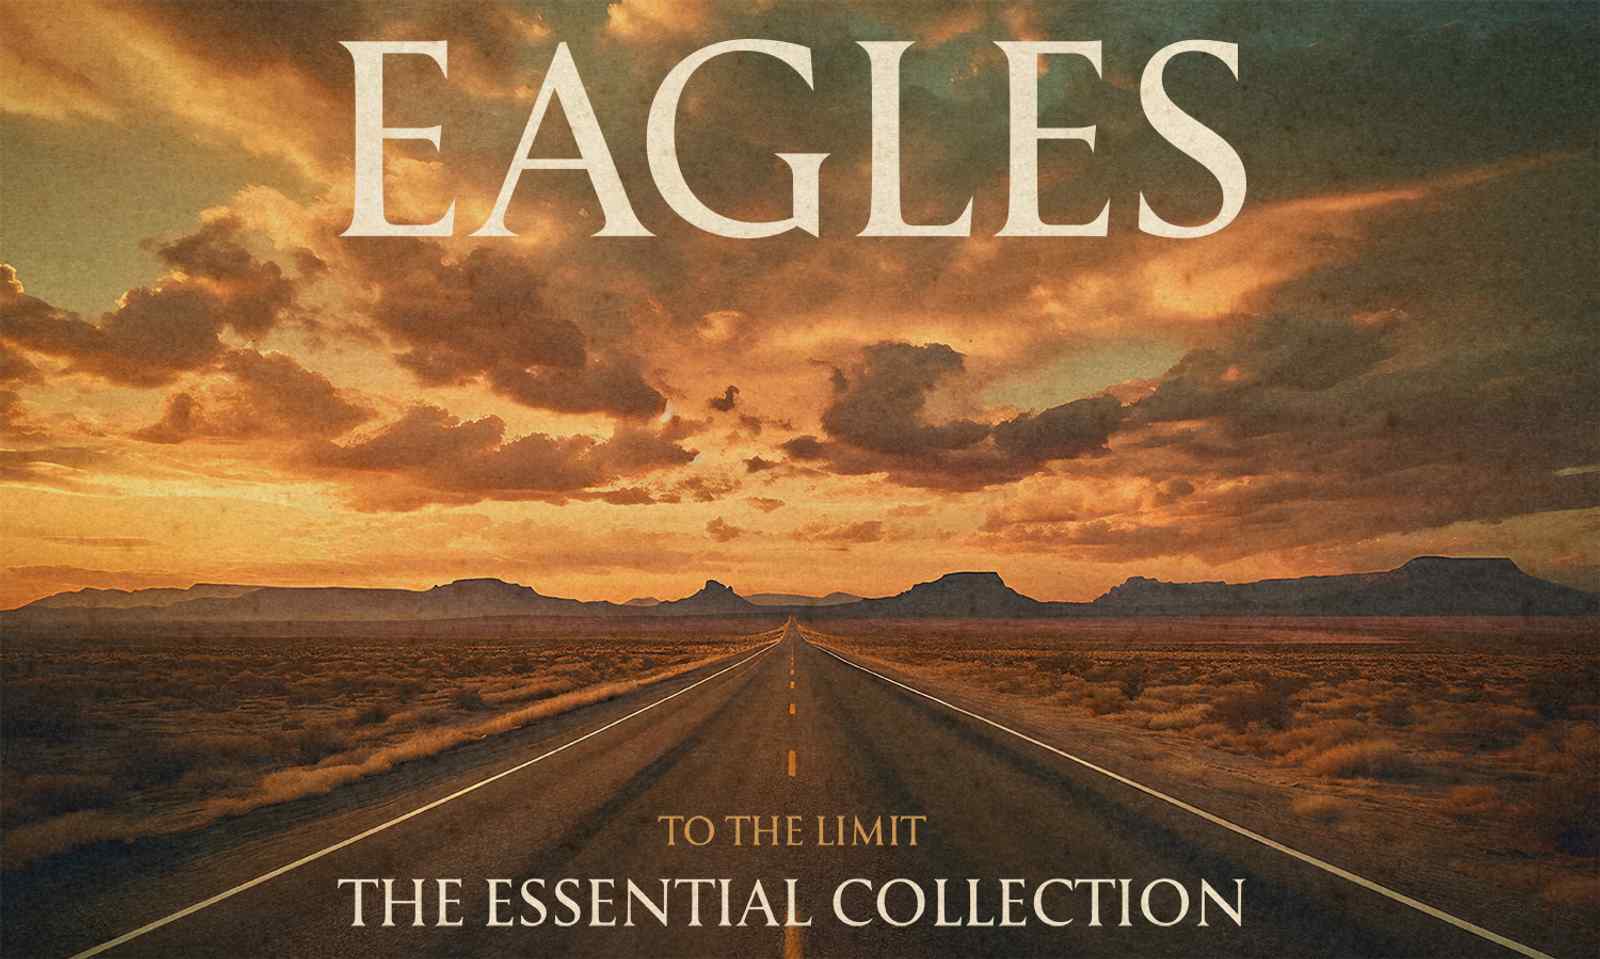 EAGLES To The Limit: The Essential Collection